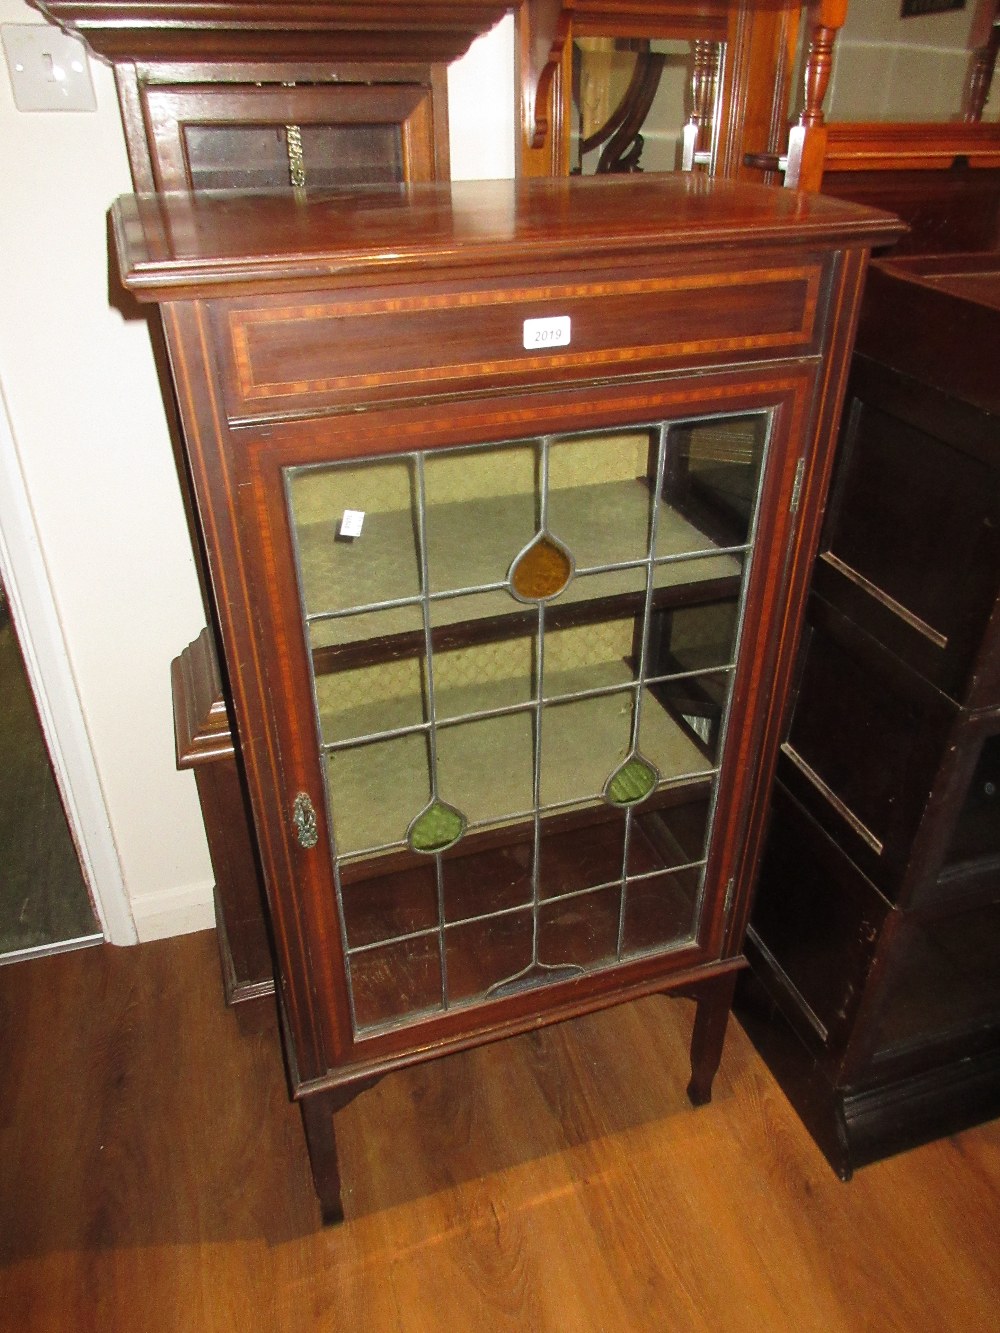 Edwardian mahogany satinwood crossbanded display cabinet with a single leaded glass door